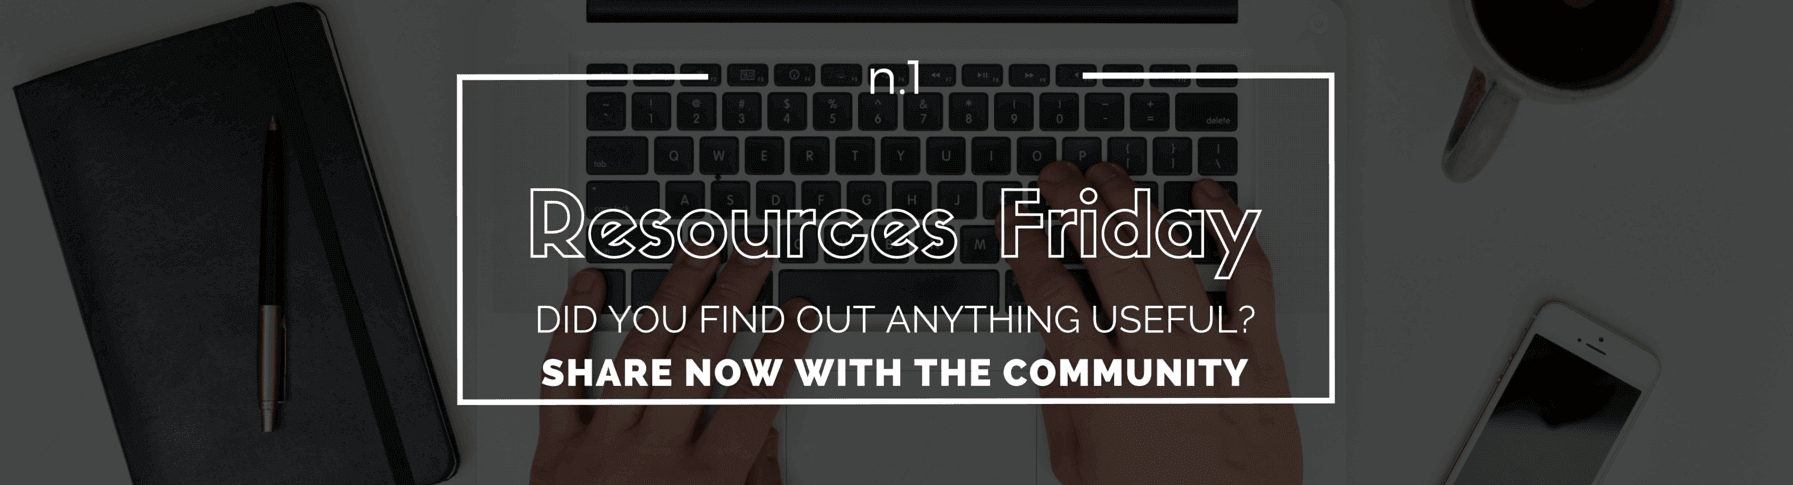 Resources Friday n.1